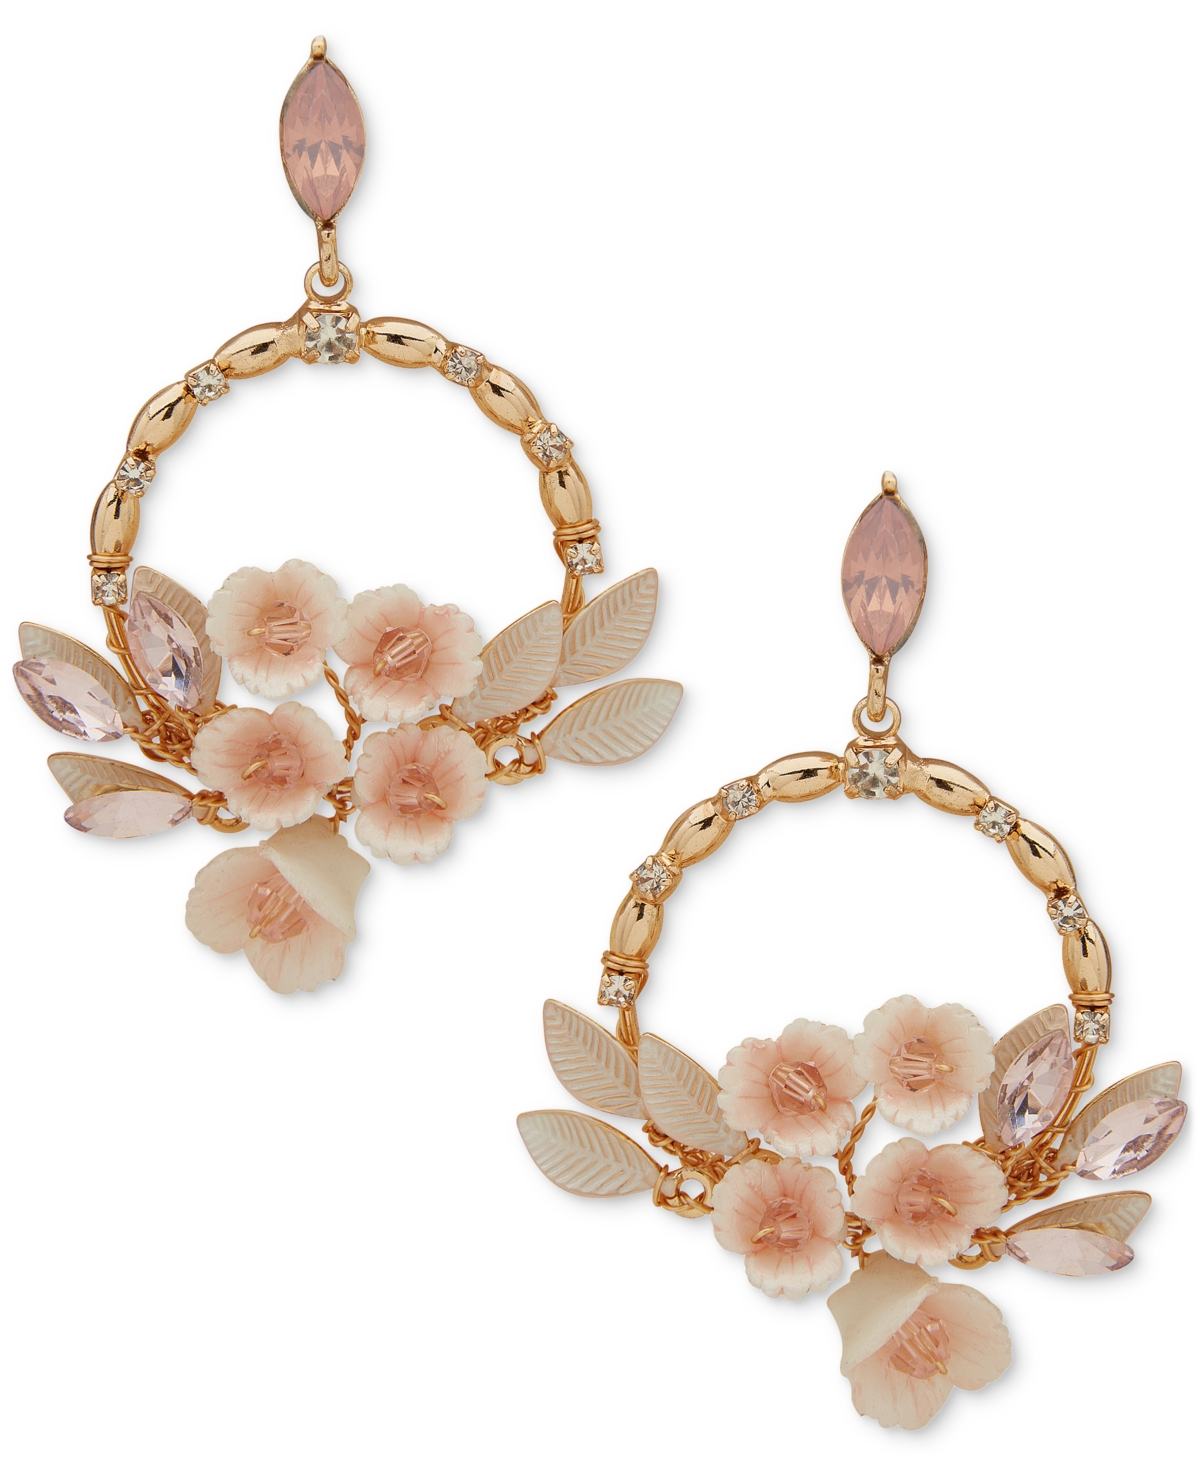 Lonna & Lilly Gold-tone Crystal & Bead Flower Chandelier Earrings In Pink